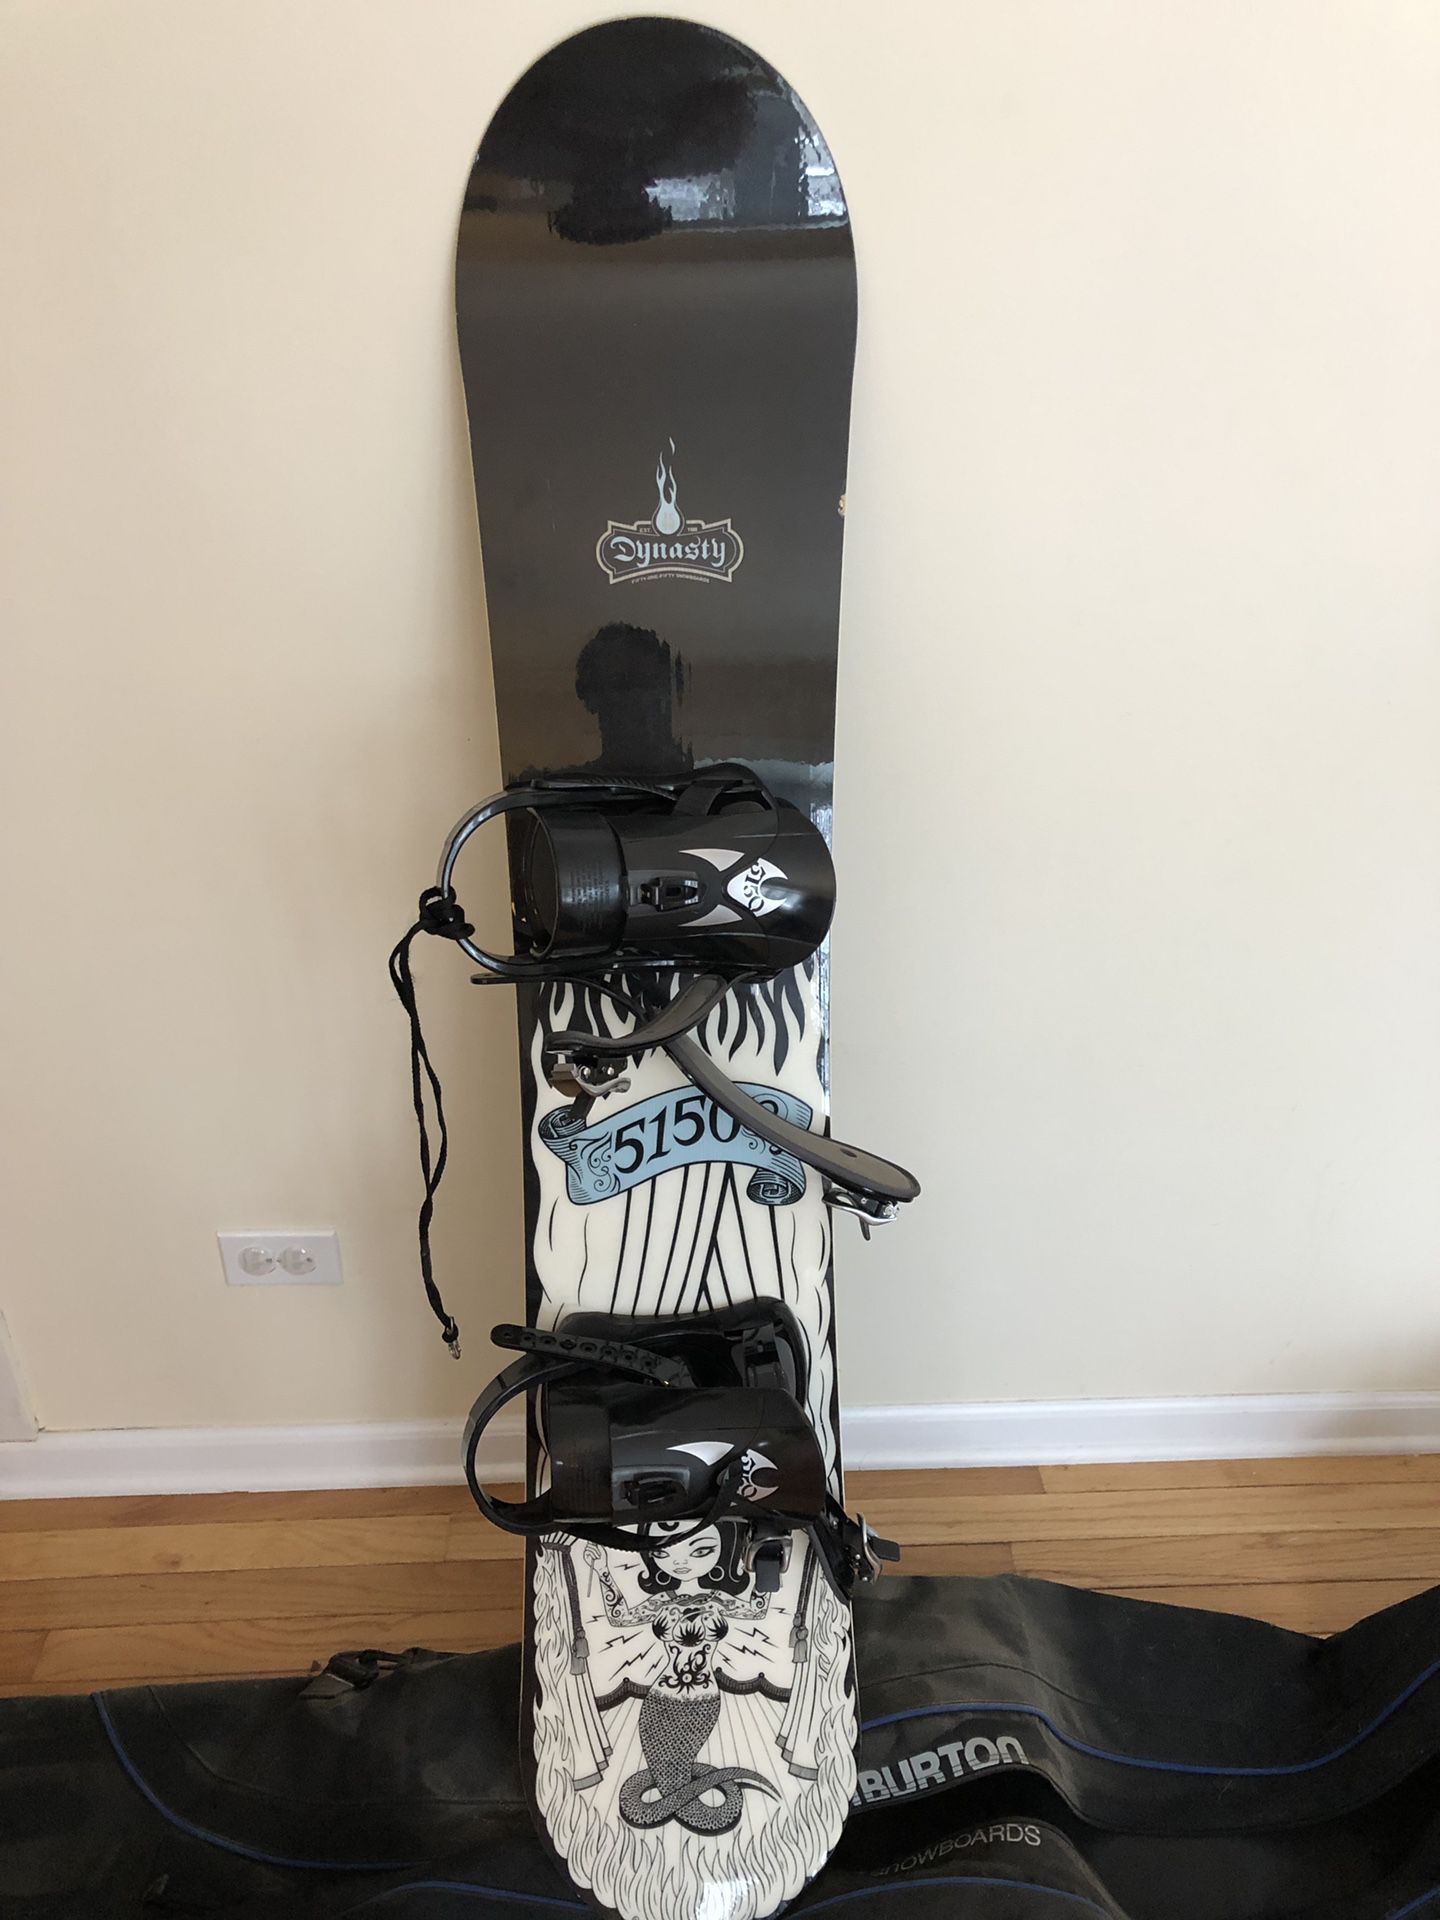 Dynasty 5150 women's snowboard with bindings and Burton for Sale in Rolling Meadows, IL - OfferUp